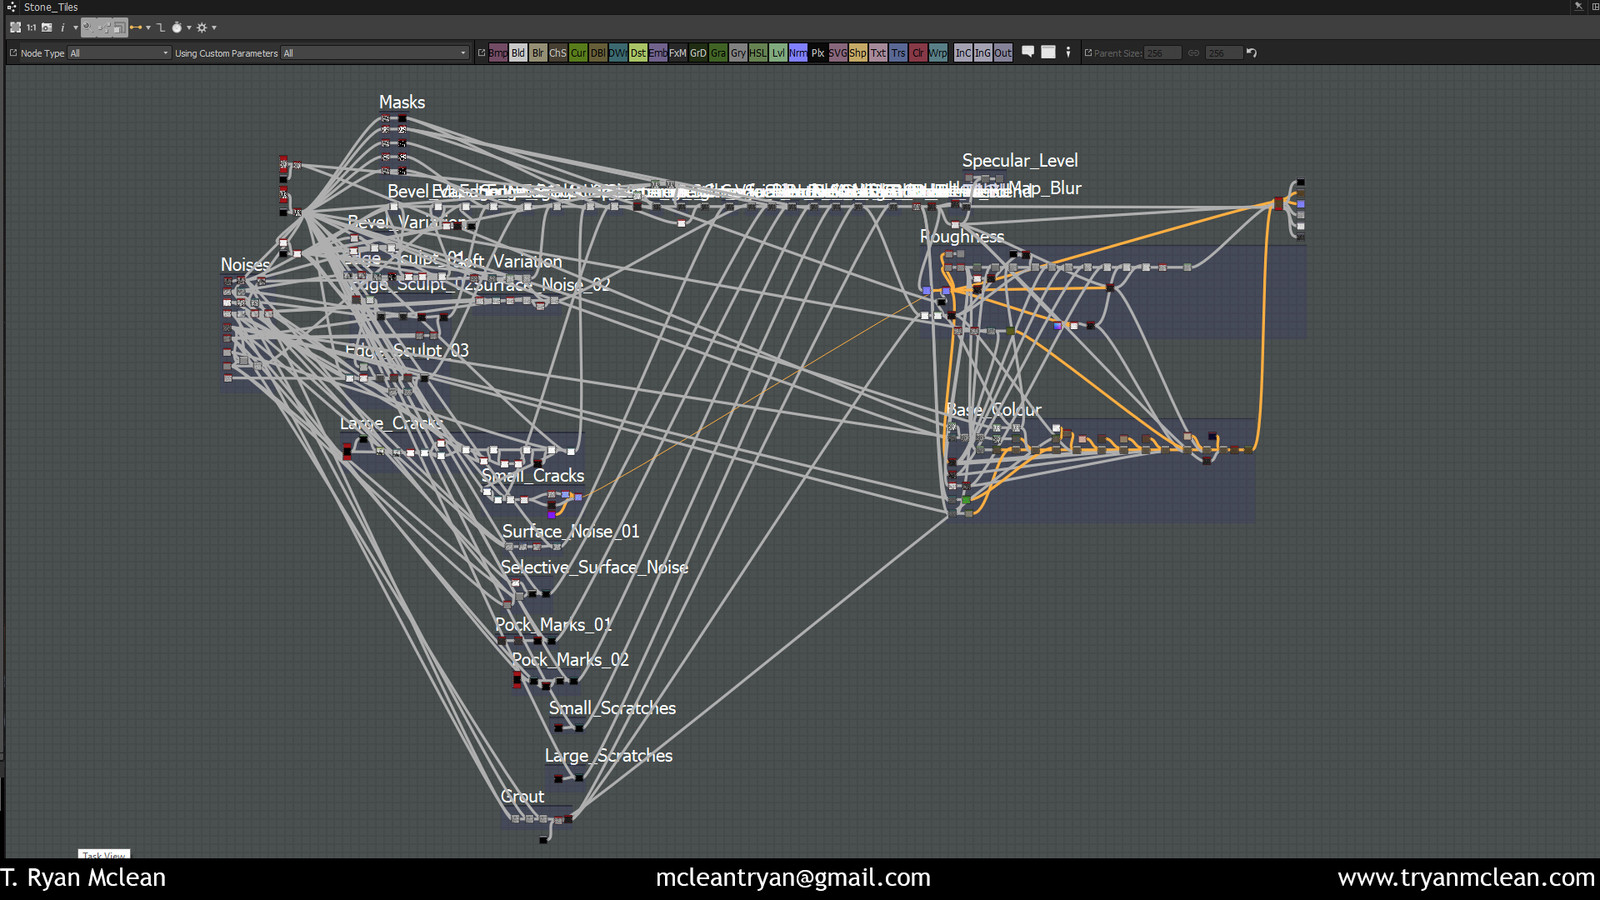 The entire Substance node structure. I try my best to keep it clean.